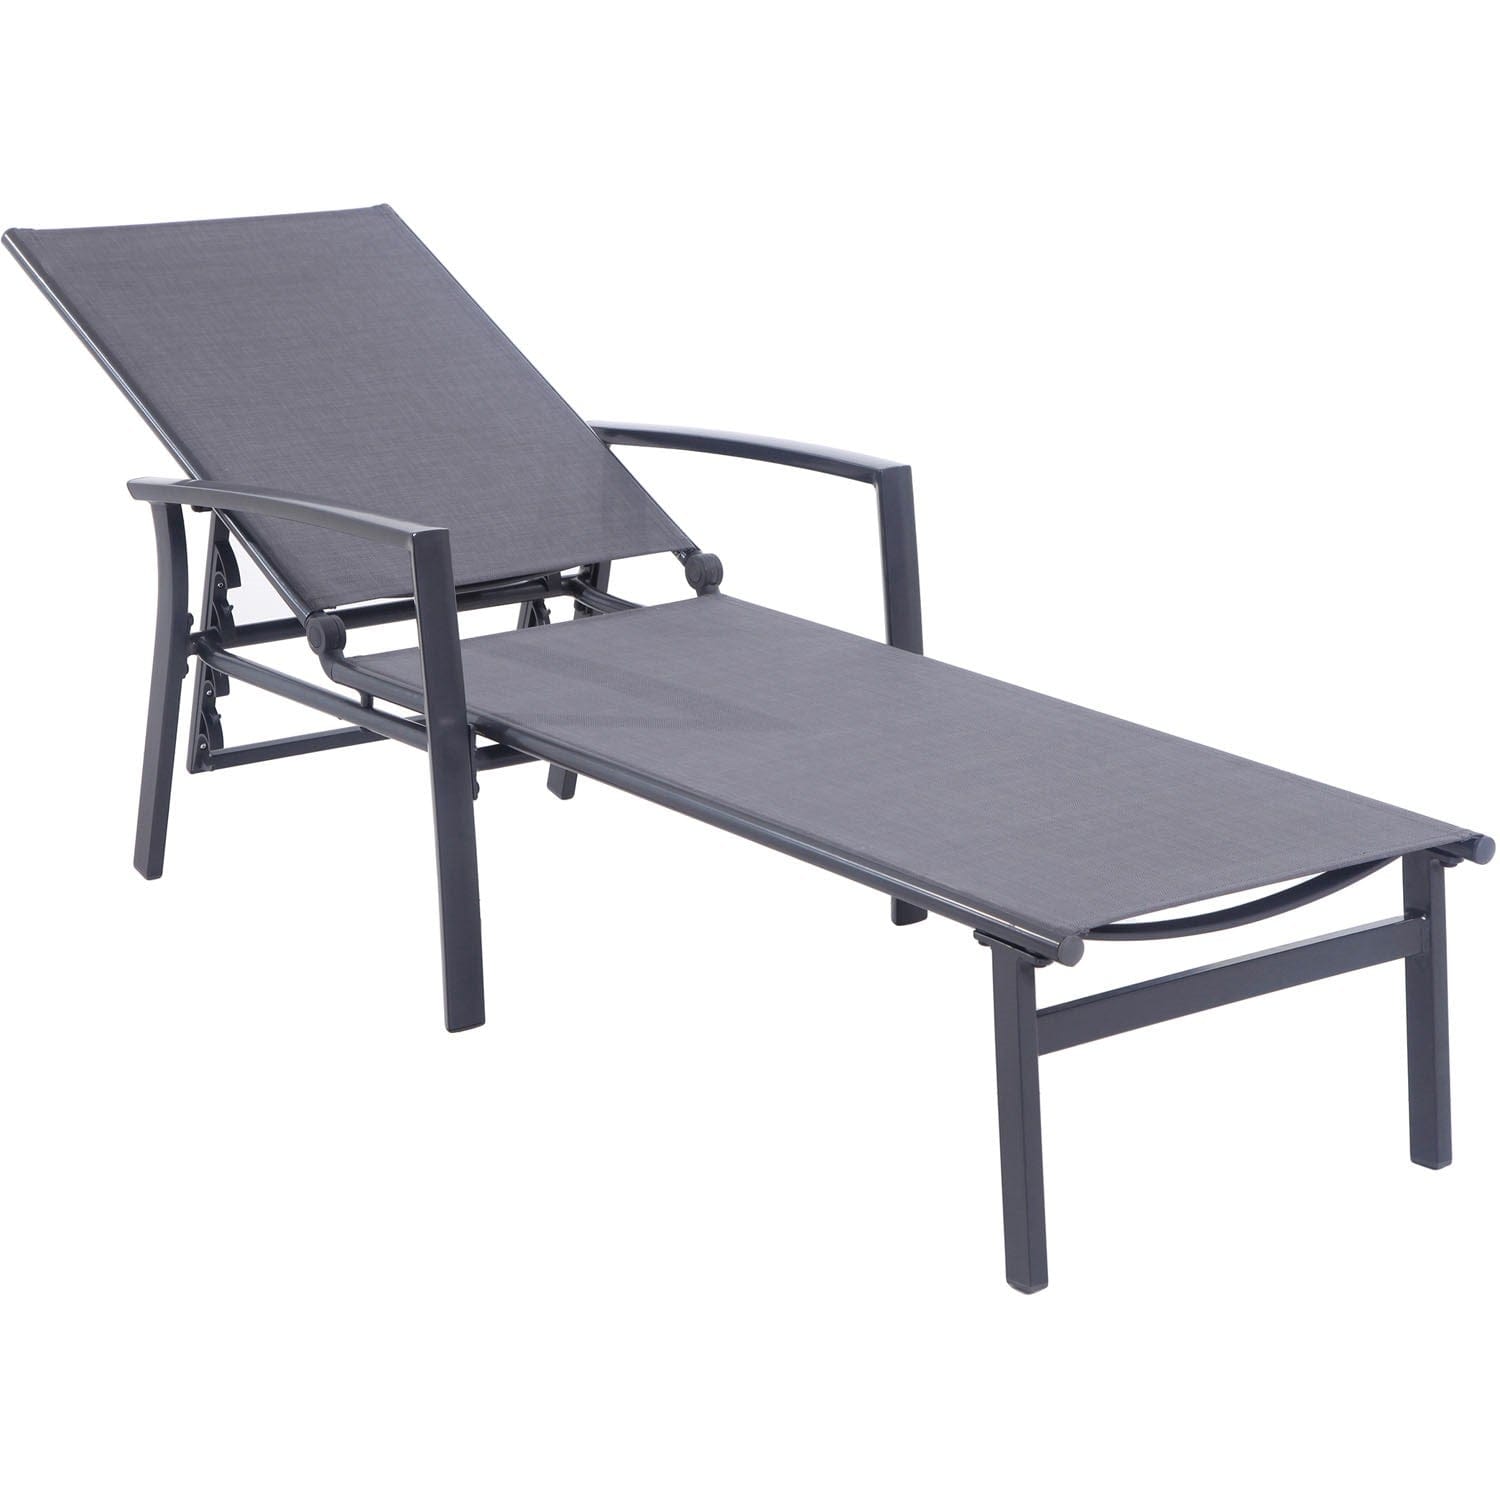 Hanover Chaise Lounge Hanover Naples Adjustable Sling Chaise in Gray Sling and Gray Frame | NAPLESCHS-GRY